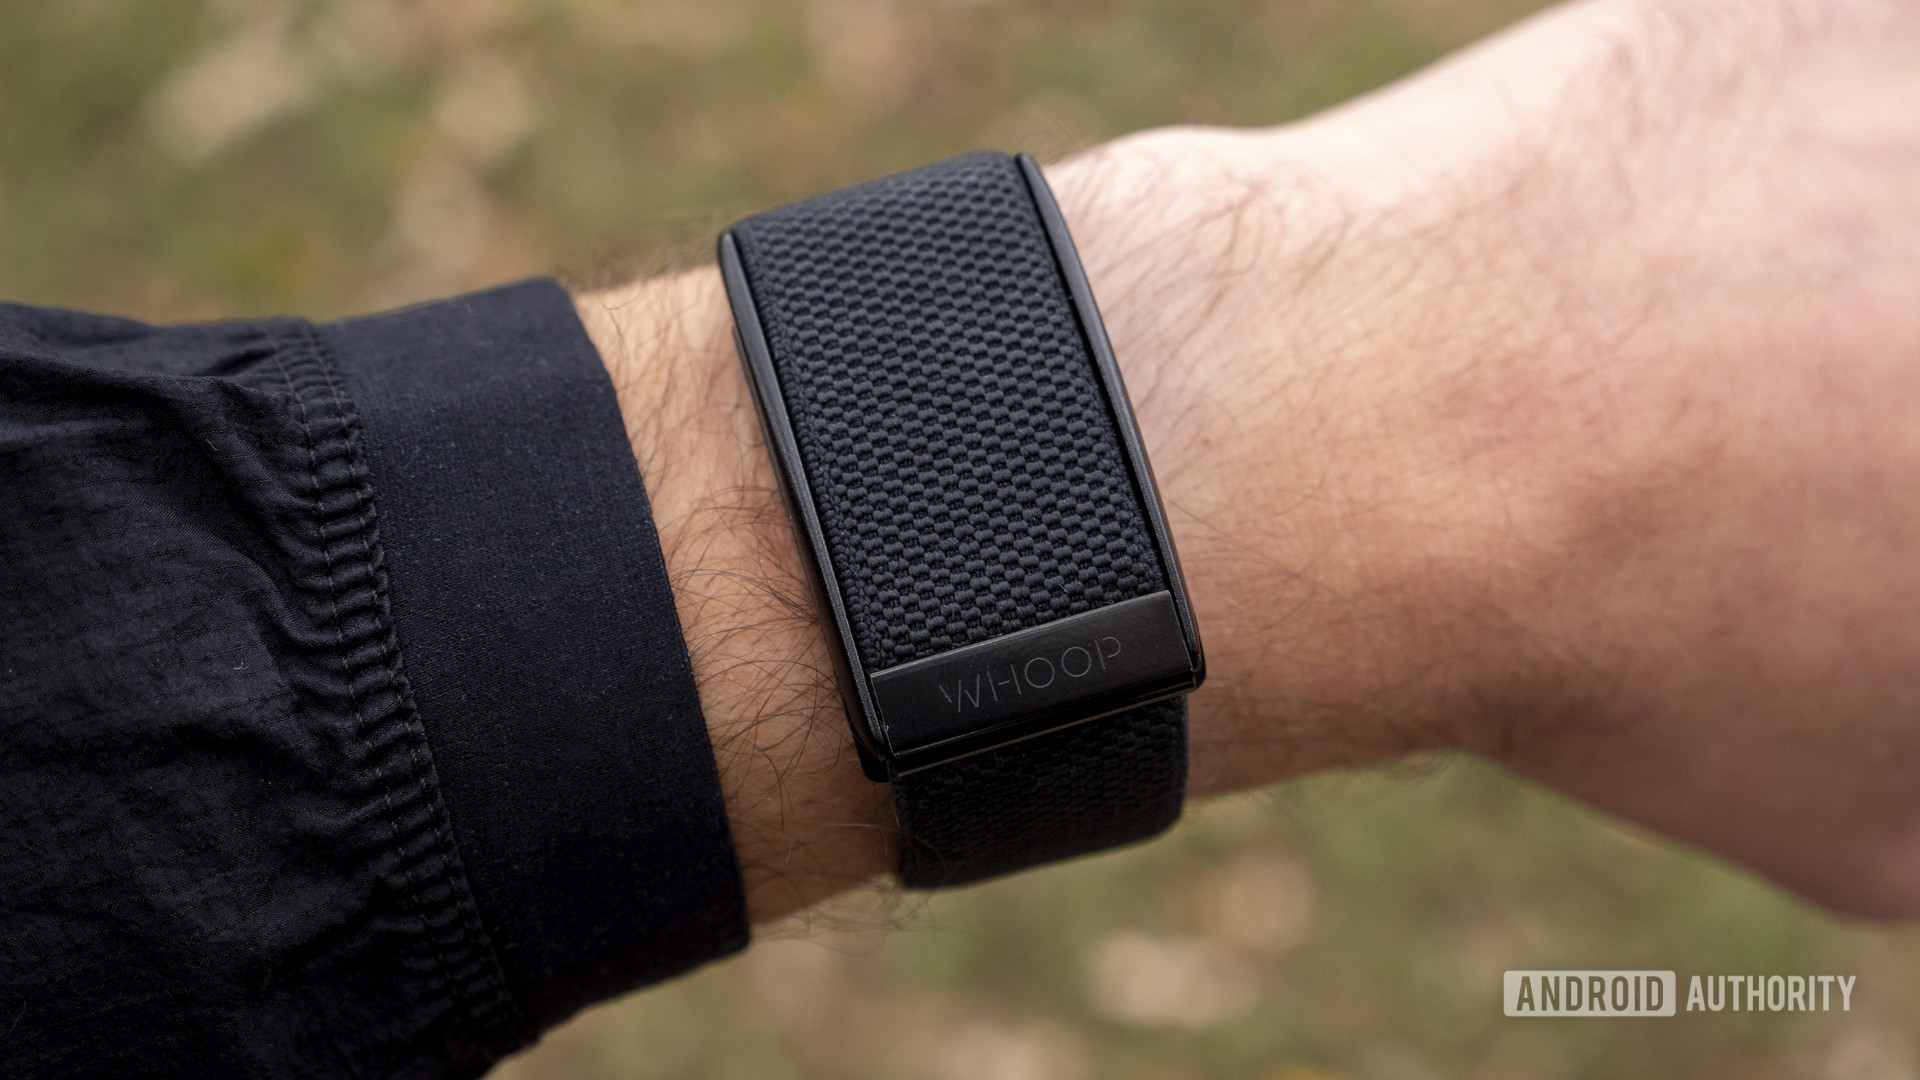 whoop strap 3.0 review on wrist